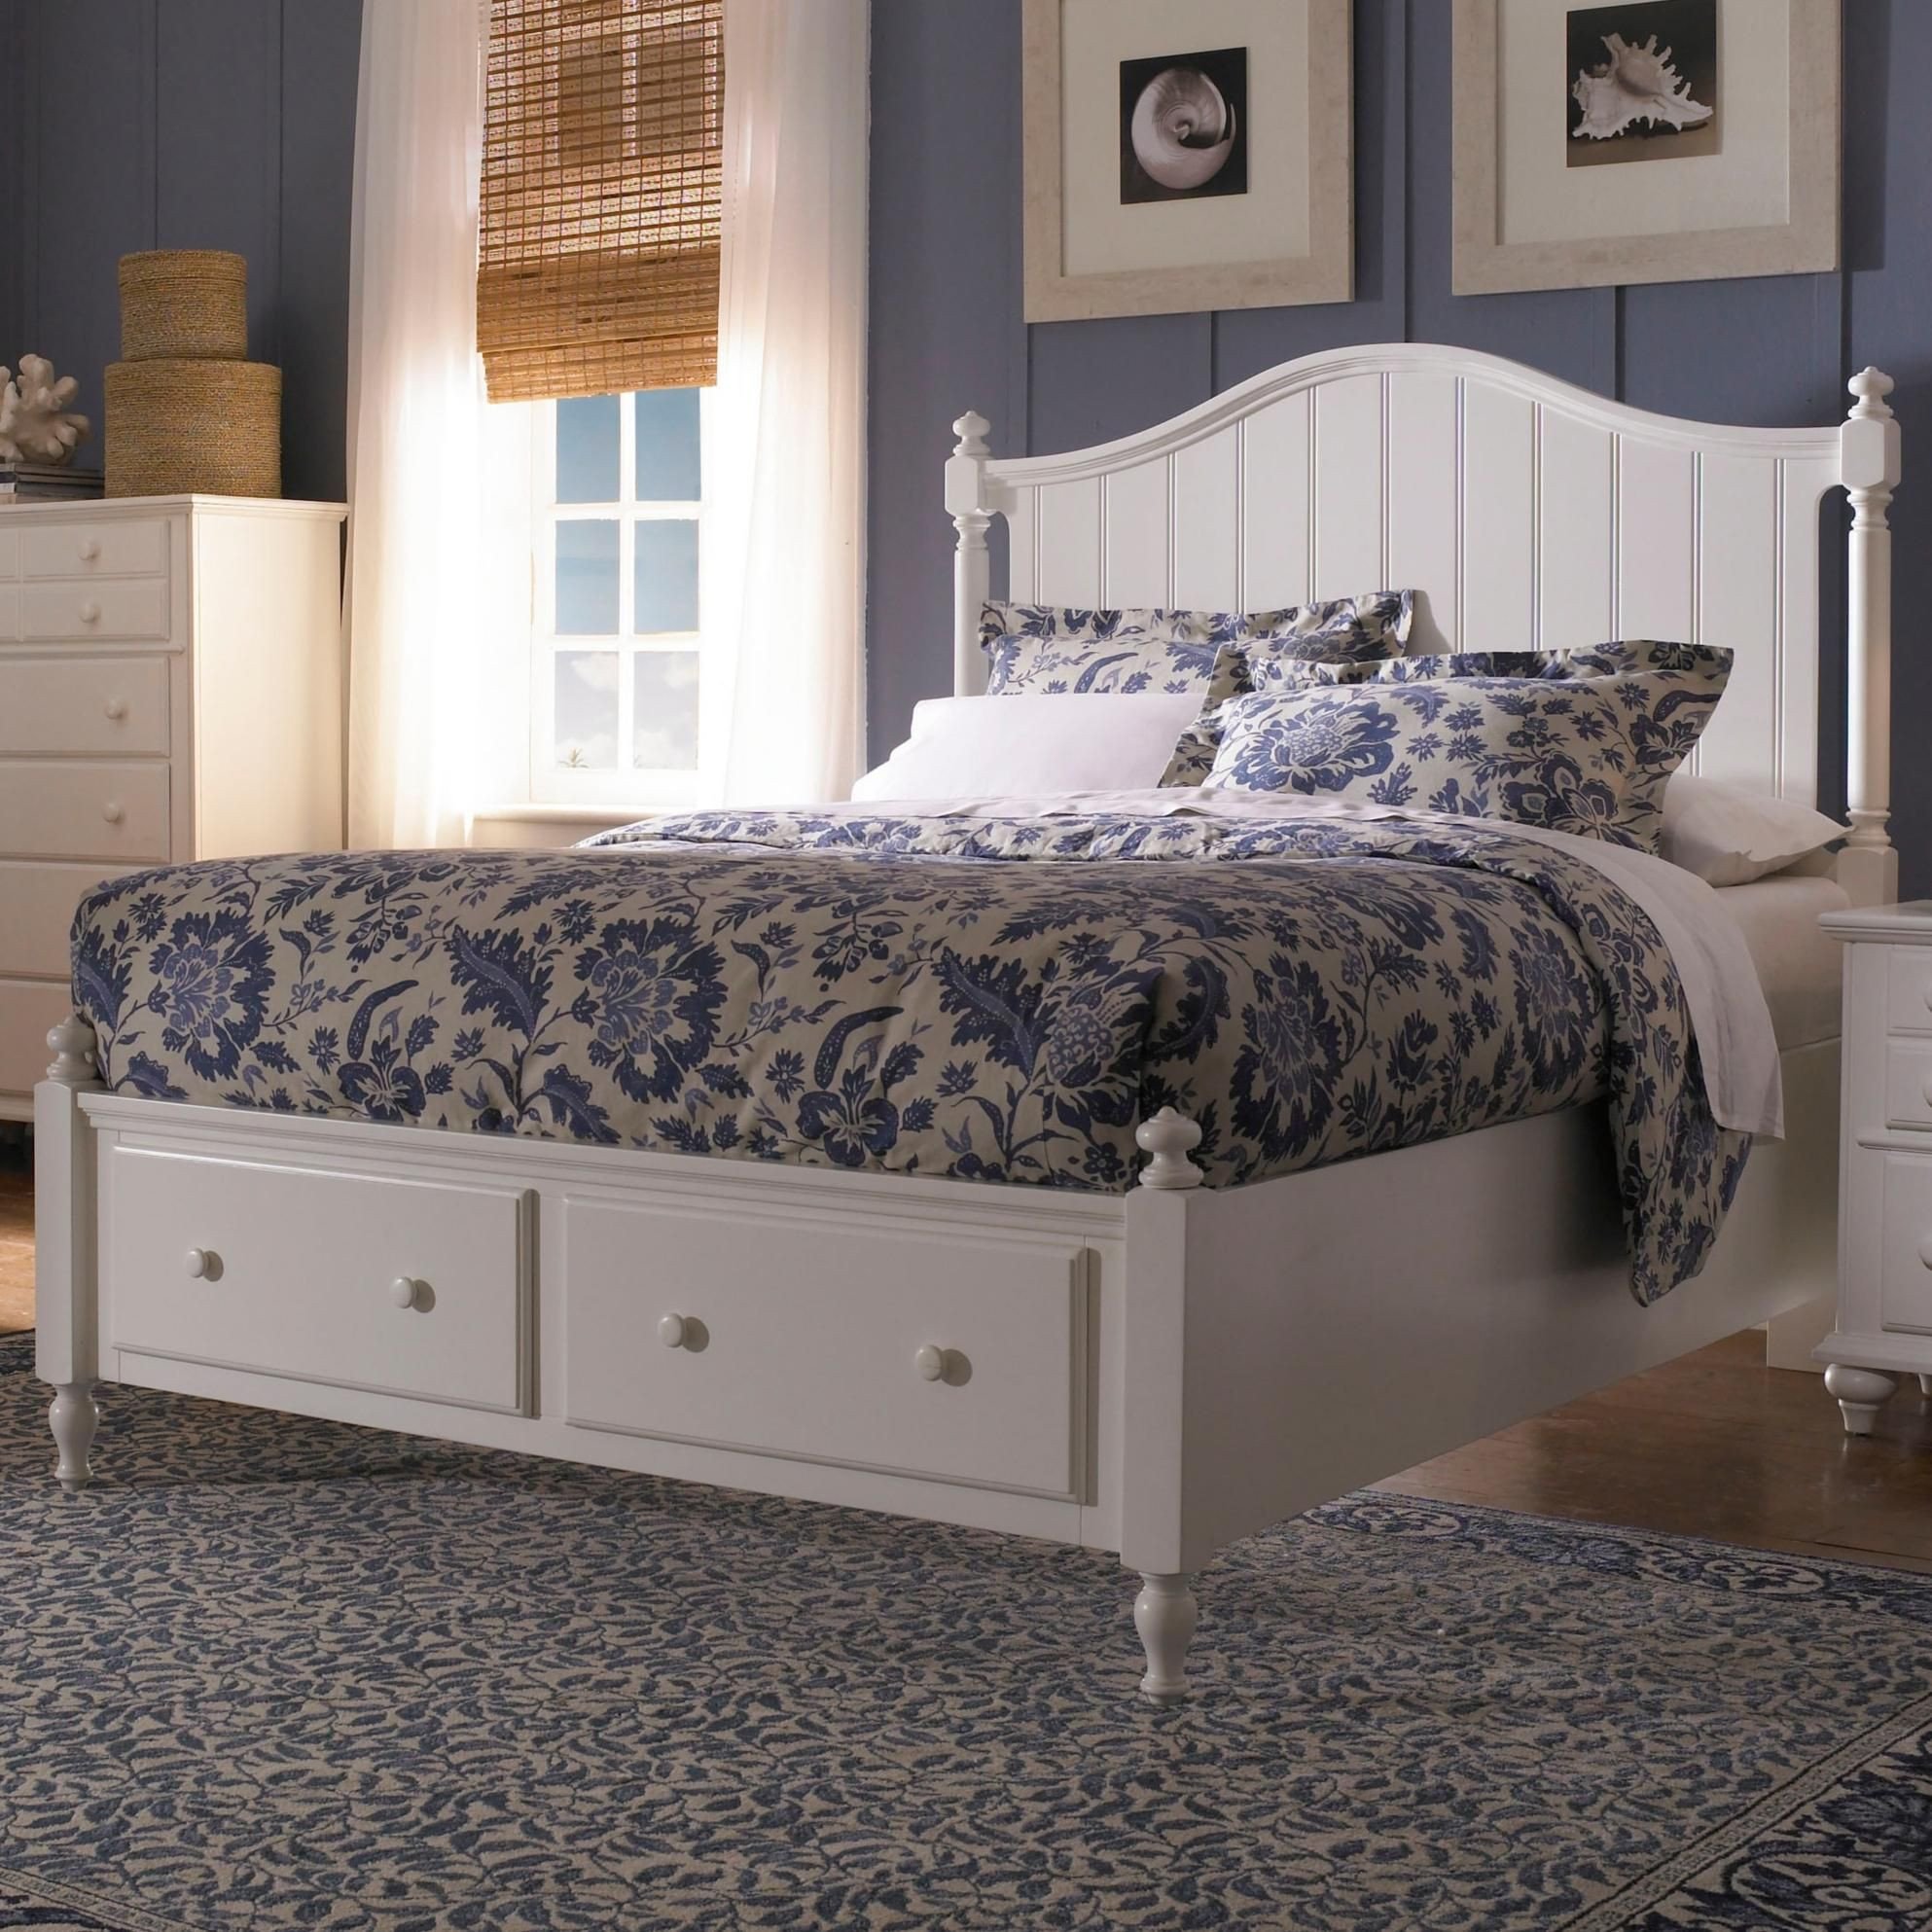 Value City Bedroom Furniture Lovely Hayden Place Queen Headboard and Storage Footboard Bed by